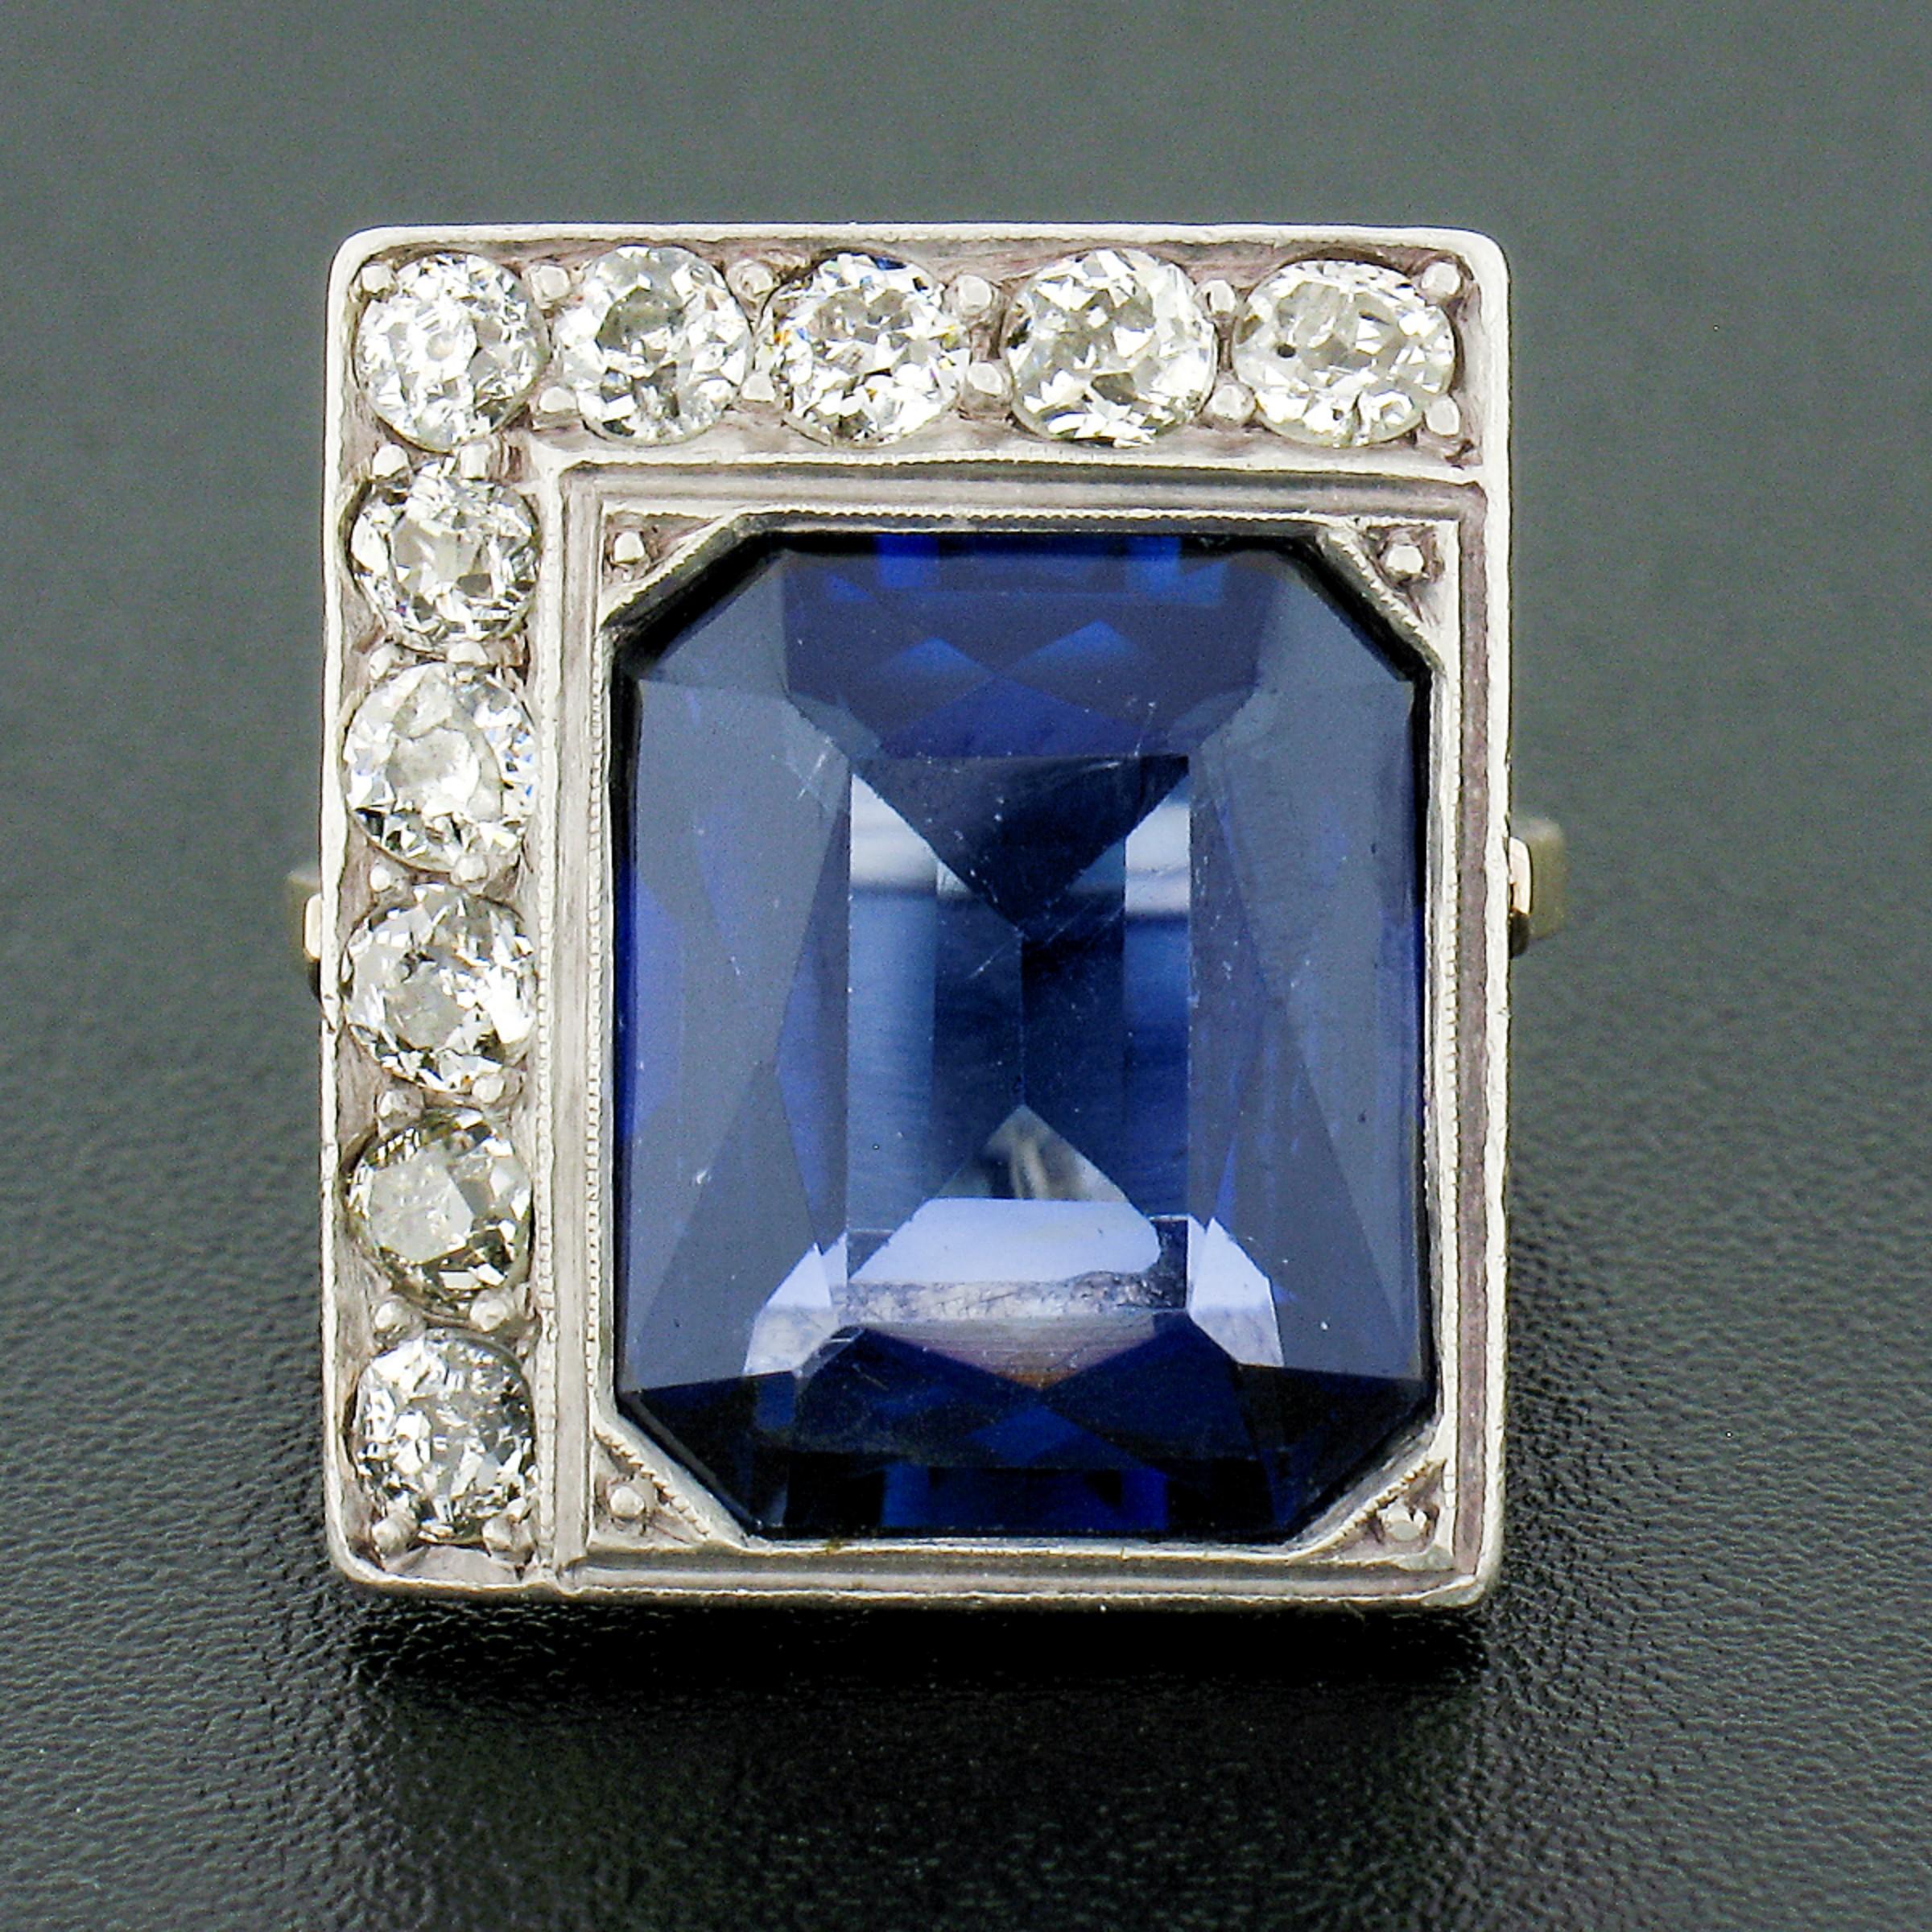 This gorgeous and unique looking antique platter ring was crafted during the 1910's from solid 18k yellow and white gold and features a large blue stone that is neatly half-framed with fine diamonds. The blue stone is milgrain bezel set at the side